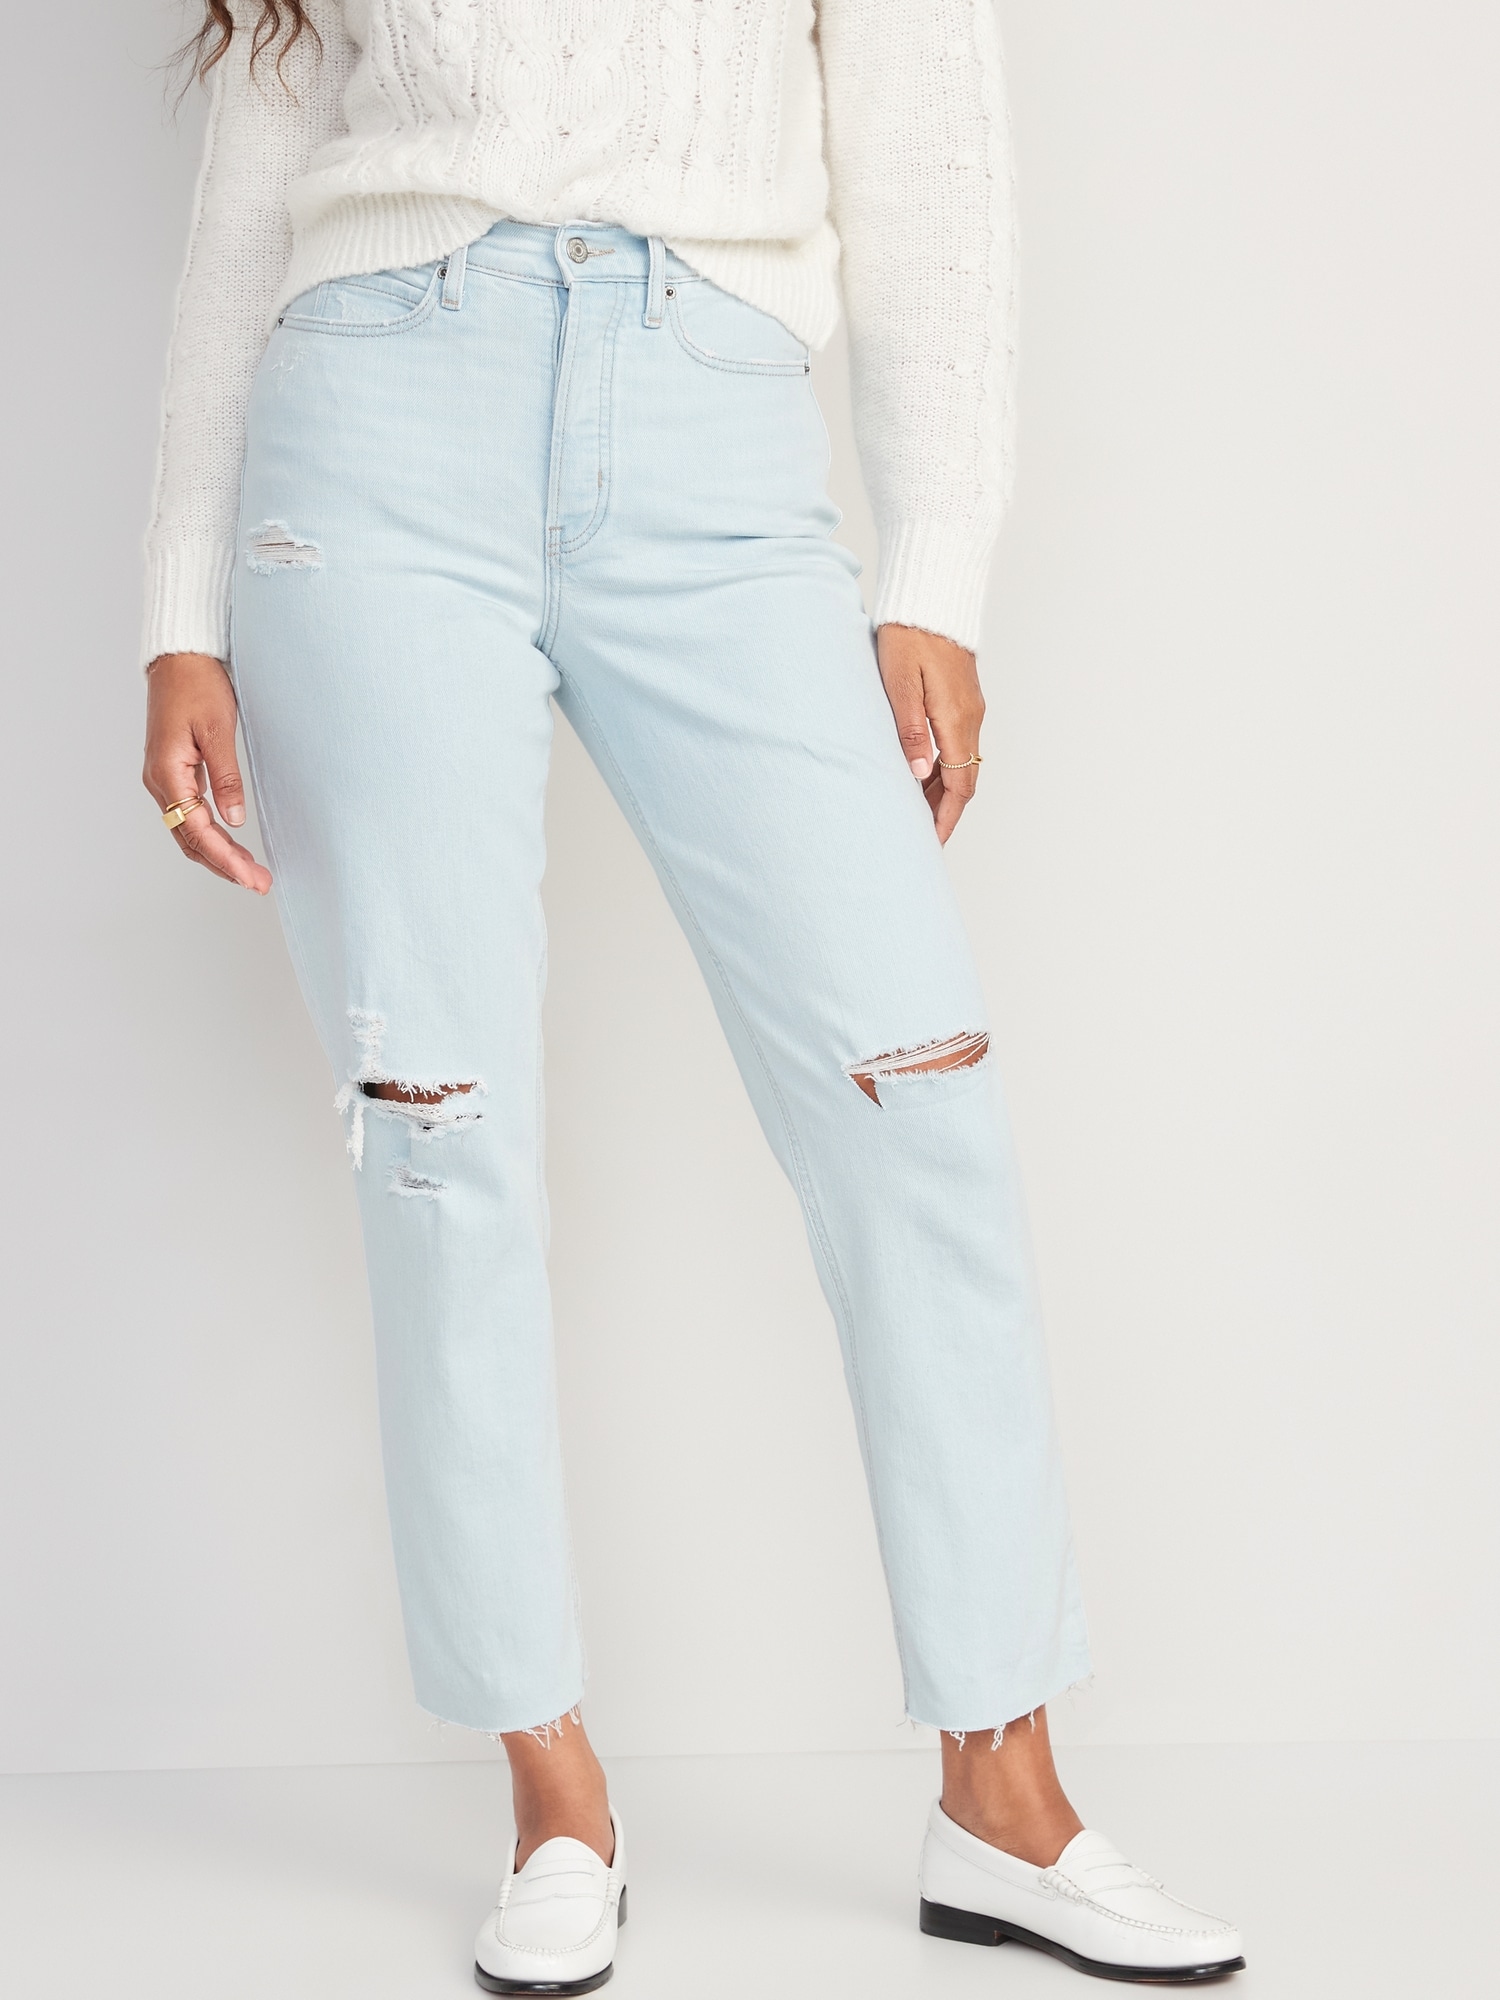 Curvy Extra High-Waisted Button-Fly Sky-Hi Straight Ripped Cut-Off Jeans for Women